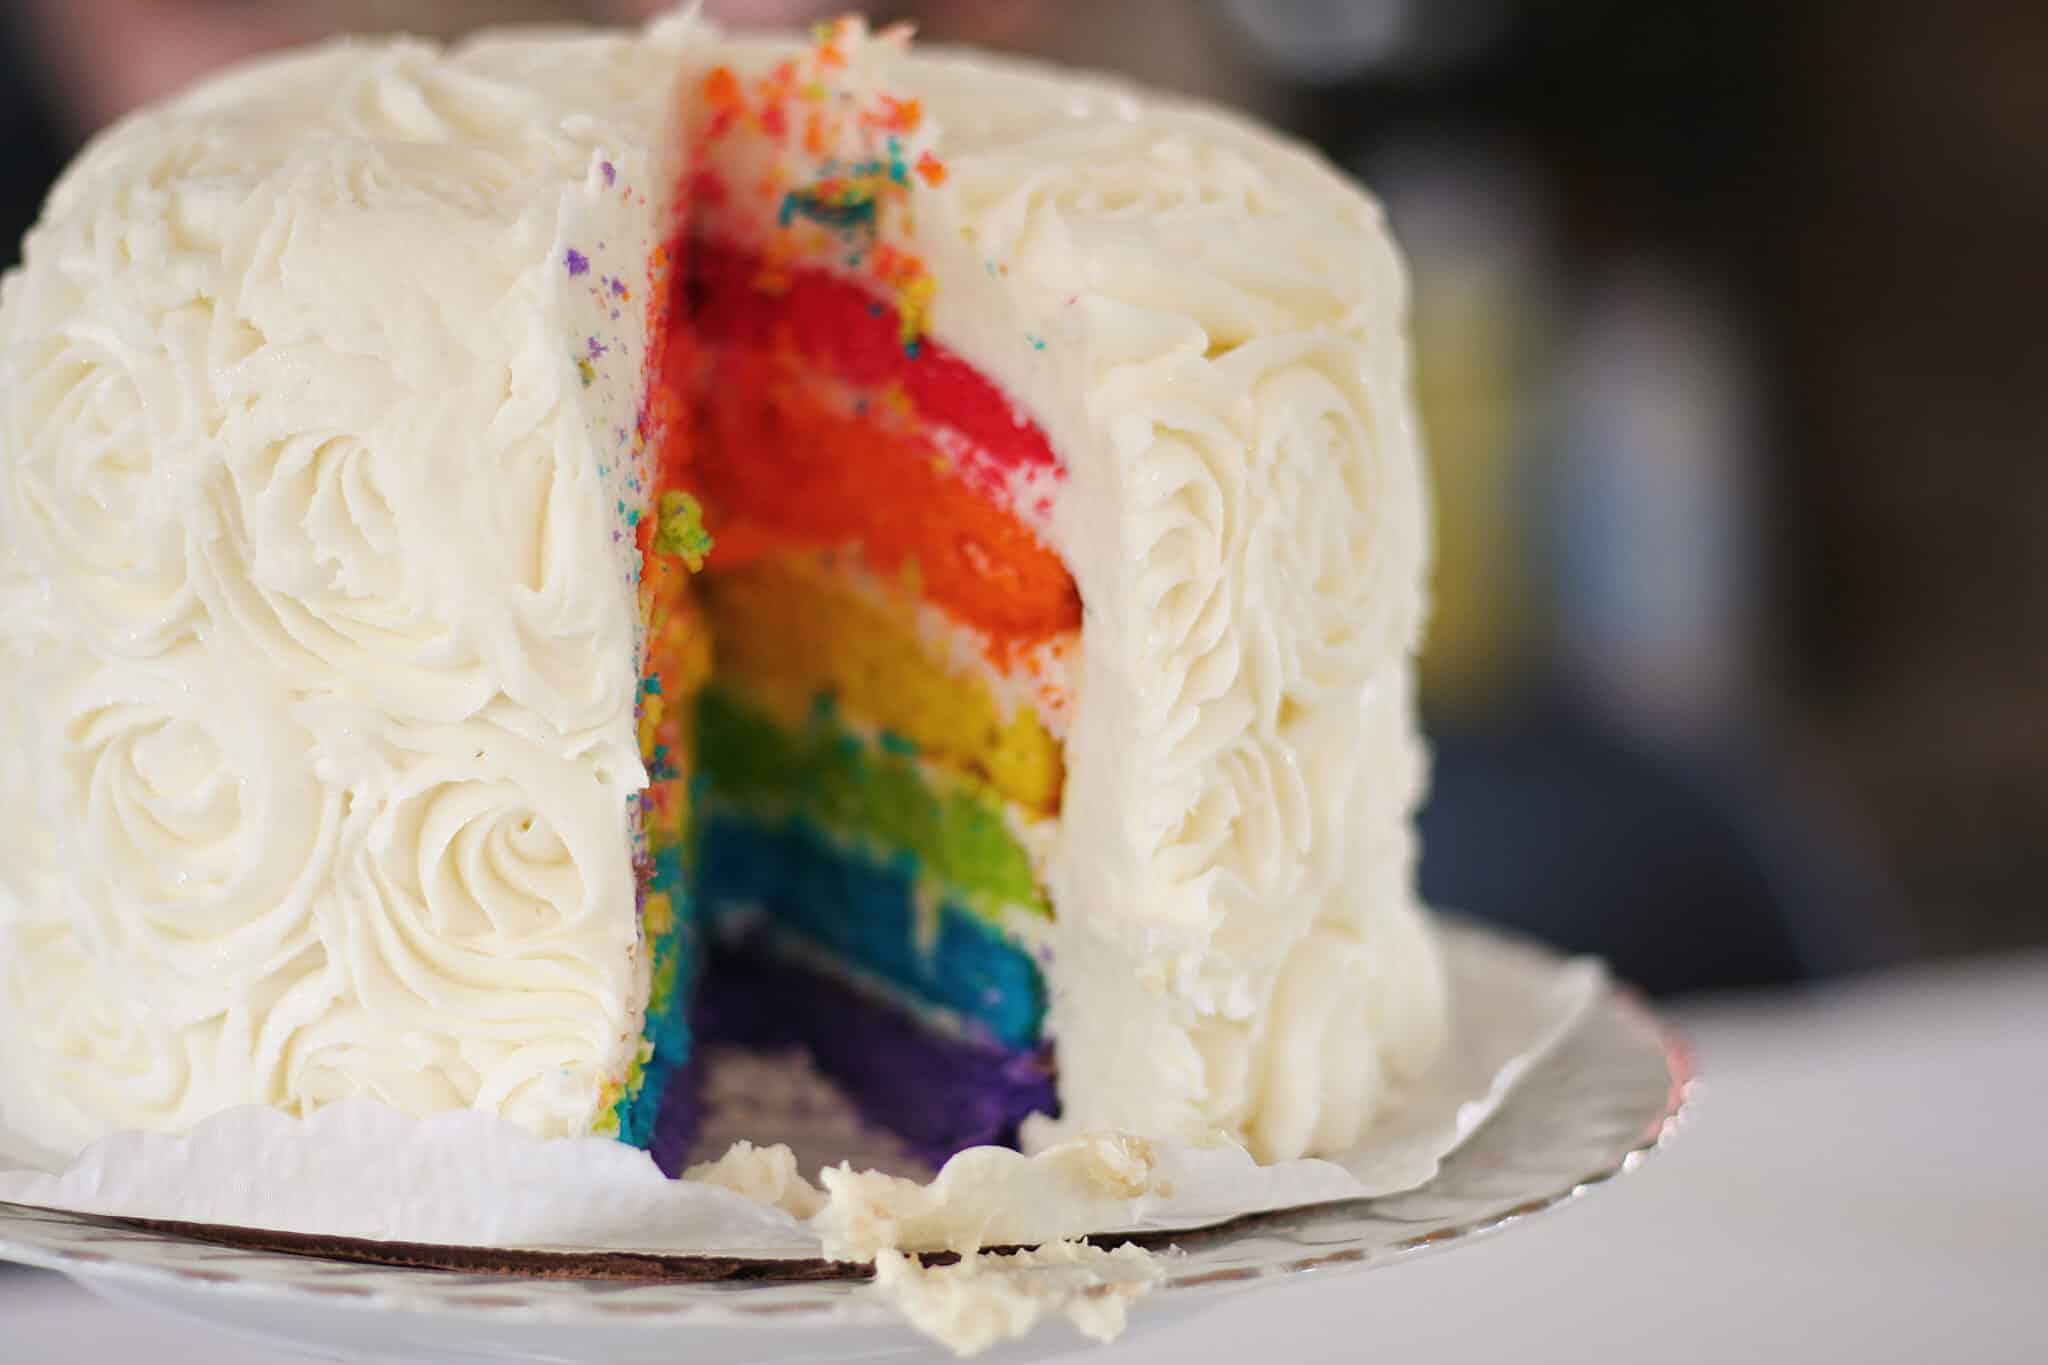 Hero baker comes to the rescue after lesbian couple denied wedding cake by homophobe